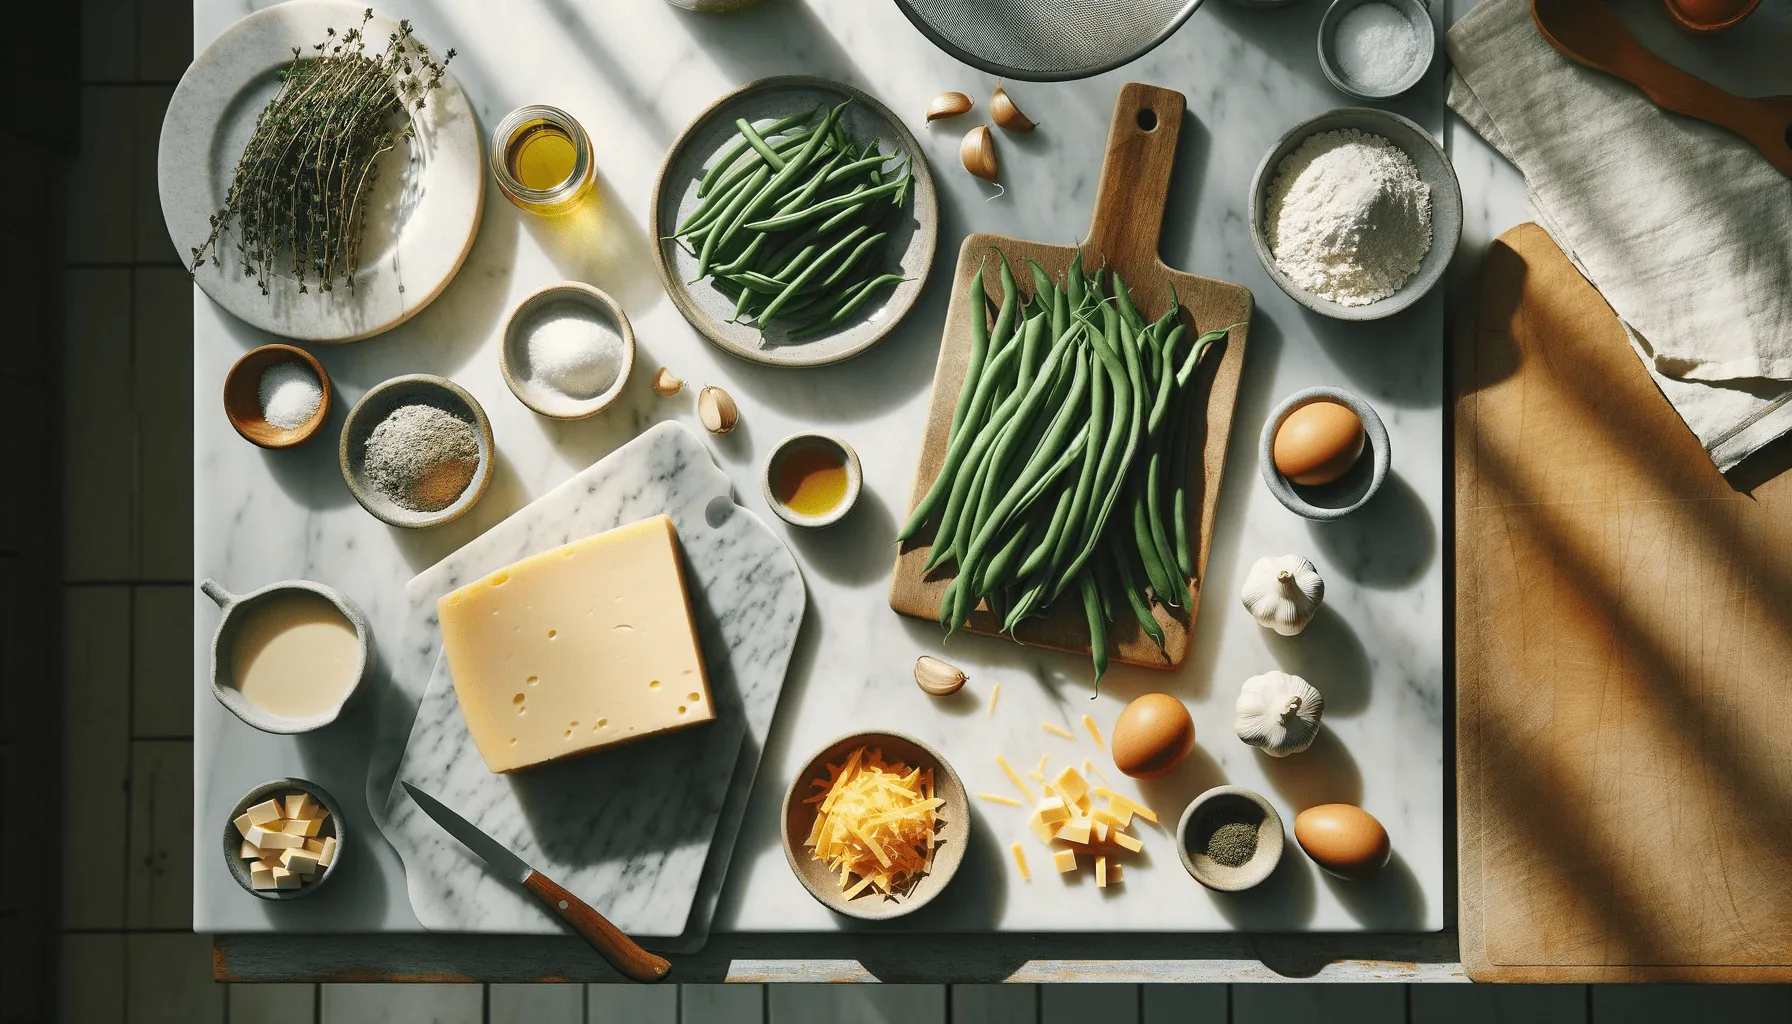 Ingredients for a green bean casserole recipe neatly laid out on a white marble countertop with wooden utensils and cutting boards